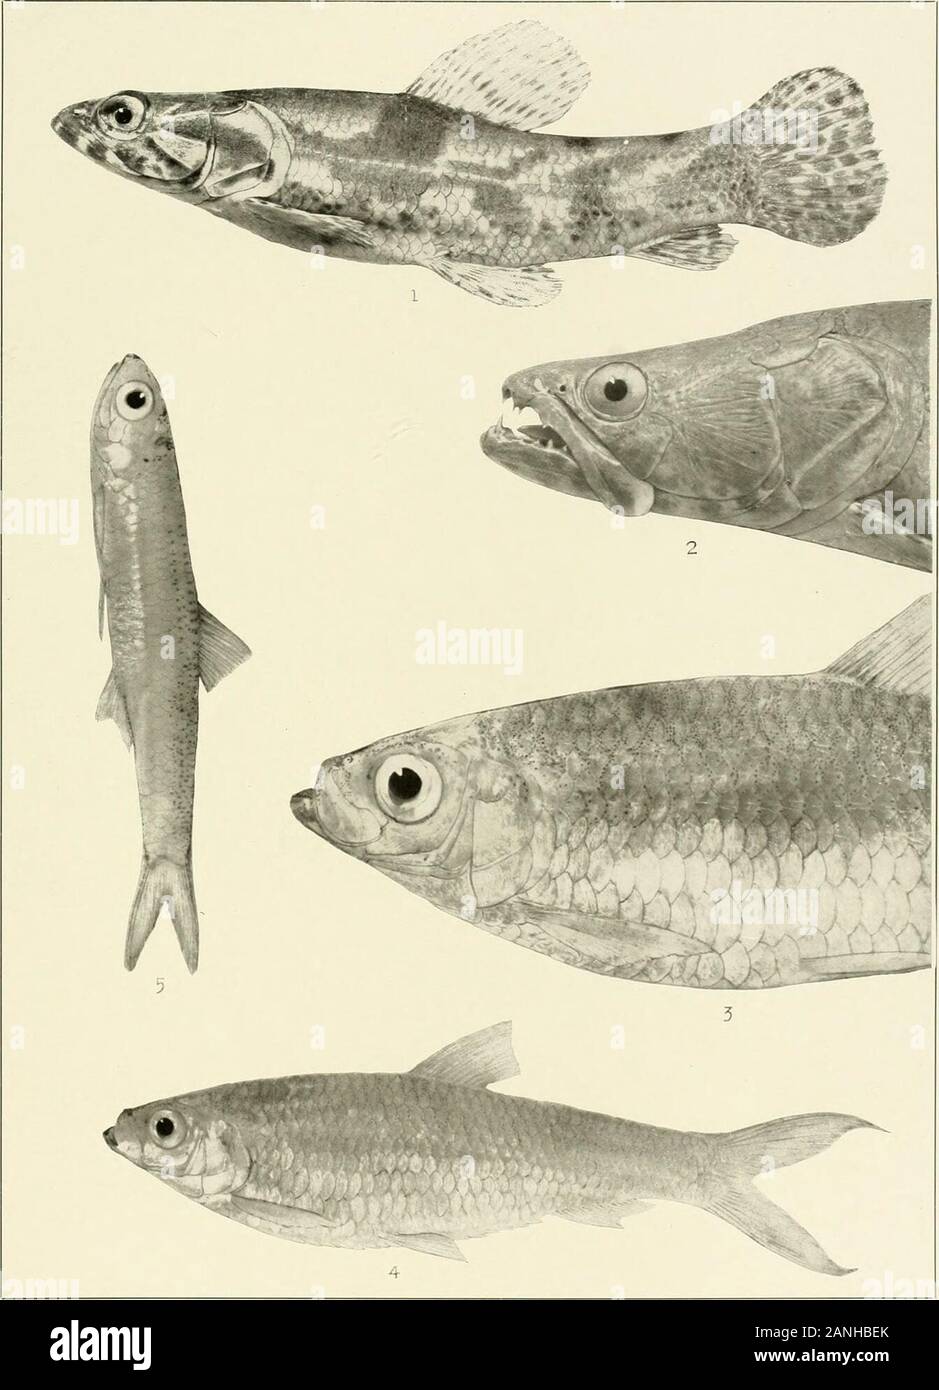 The freshwater fishes of British Guiana, including a study of the ecological grouping of species and the relation of the fauna of the plateau to that of the lowlands . 1. AcanthocharaxmicrolepisEigenmann. (Type.) 10.) mm. No. 2138. 2. HeterocharaxmaerolepisTOiiGEN-manx. (Type.) 46 mm. No. 2142. 3. Acestrorhynchns falcatu&(Bi.och). 170 mm. No. 1960. 4. Acestro-rhynchus nasutus Eigenmann. (Type.) 79 mm, No. 1959, Memoirs Carnegie Museum, Vol. V. Plate LXII. l. Hoplias macrophthalmus (Pellegrin). L91 mm. No. 2174. 2. Hoplias malabaricus (Bloch). 195 nun.I. U.No. 10,252. 3. Rhinosardinia serrata E Stock Photo